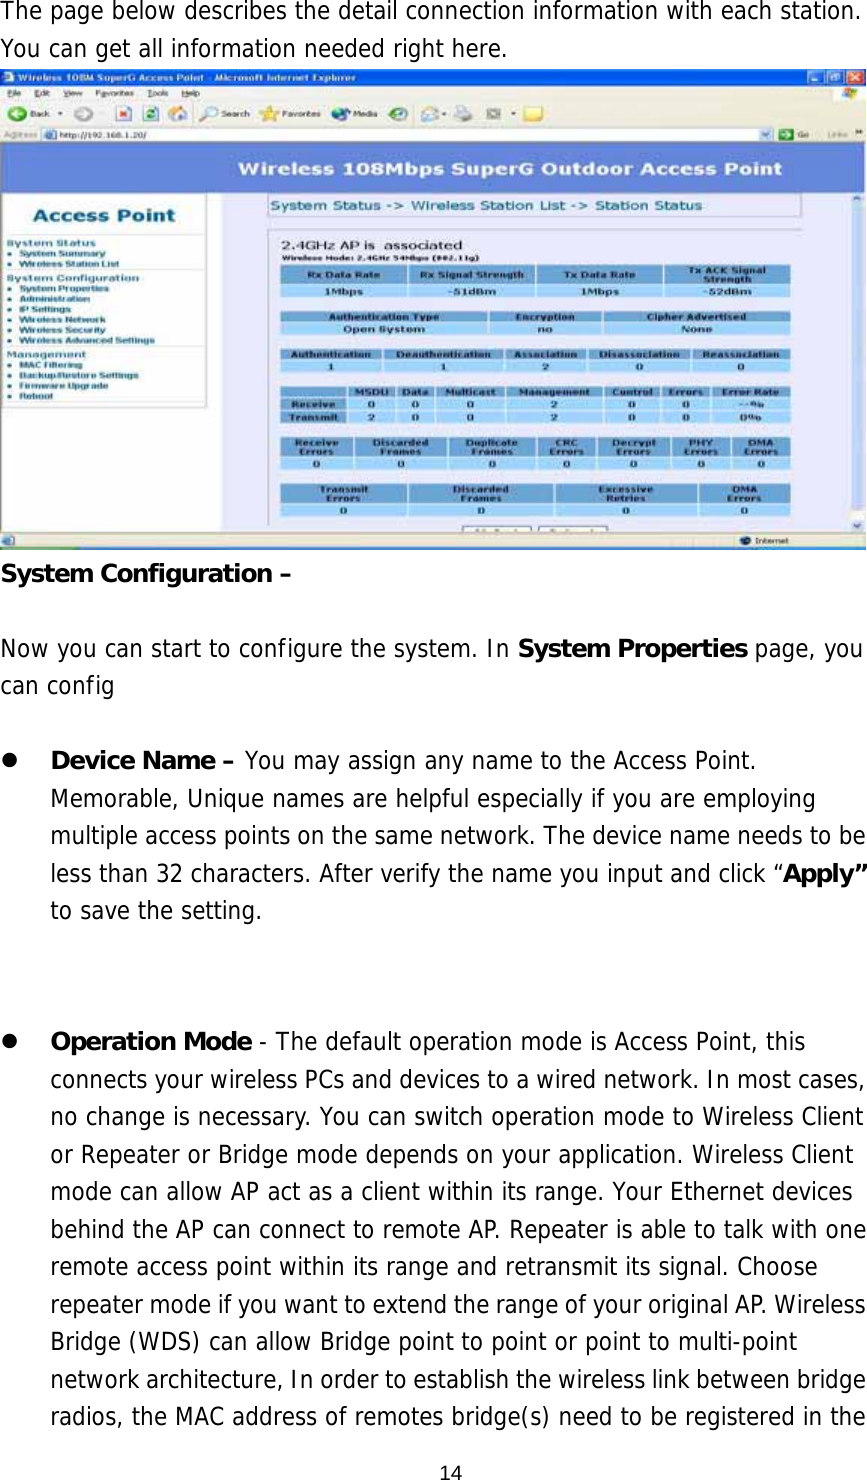  14The page below describes the detail connection information with each station. You can get all information needed right here.  System Configuration –    Now you can start to configure the system. In System Properties page, you can config     Device Name – You may assign any name to the Access Point. Memorable, Unique names are helpful especially if you are employing multiple access points on the same network. The device name needs to be less than 32 characters. After verify the name you input and click “Apply” to save the setting.   Country/Region – Here you can set the AP to follow different country and region regulation. The AP can support    Operation Mode - The default operation mode is Access Point, this connects your wireless PCs and devices to a wired network. In most cases, no change is necessary. You can switch operation mode to Wireless Client or Repeater or Bridge mode depends on your application. Wireless Client mode can allow AP act as a client within its range. Your Ethernet devices behind the AP can connect to remote AP. Repeater is able to talk with one remote access point within its range and retransmit its signal. Choose repeater mode if you want to extend the range of your original AP. Wireless Bridge (WDS) can allow Bridge point to point or point to multi-point network architecture, In order to establish the wireless link between bridge radios, the MAC address of remotes bridge(s) need to be registered in the 